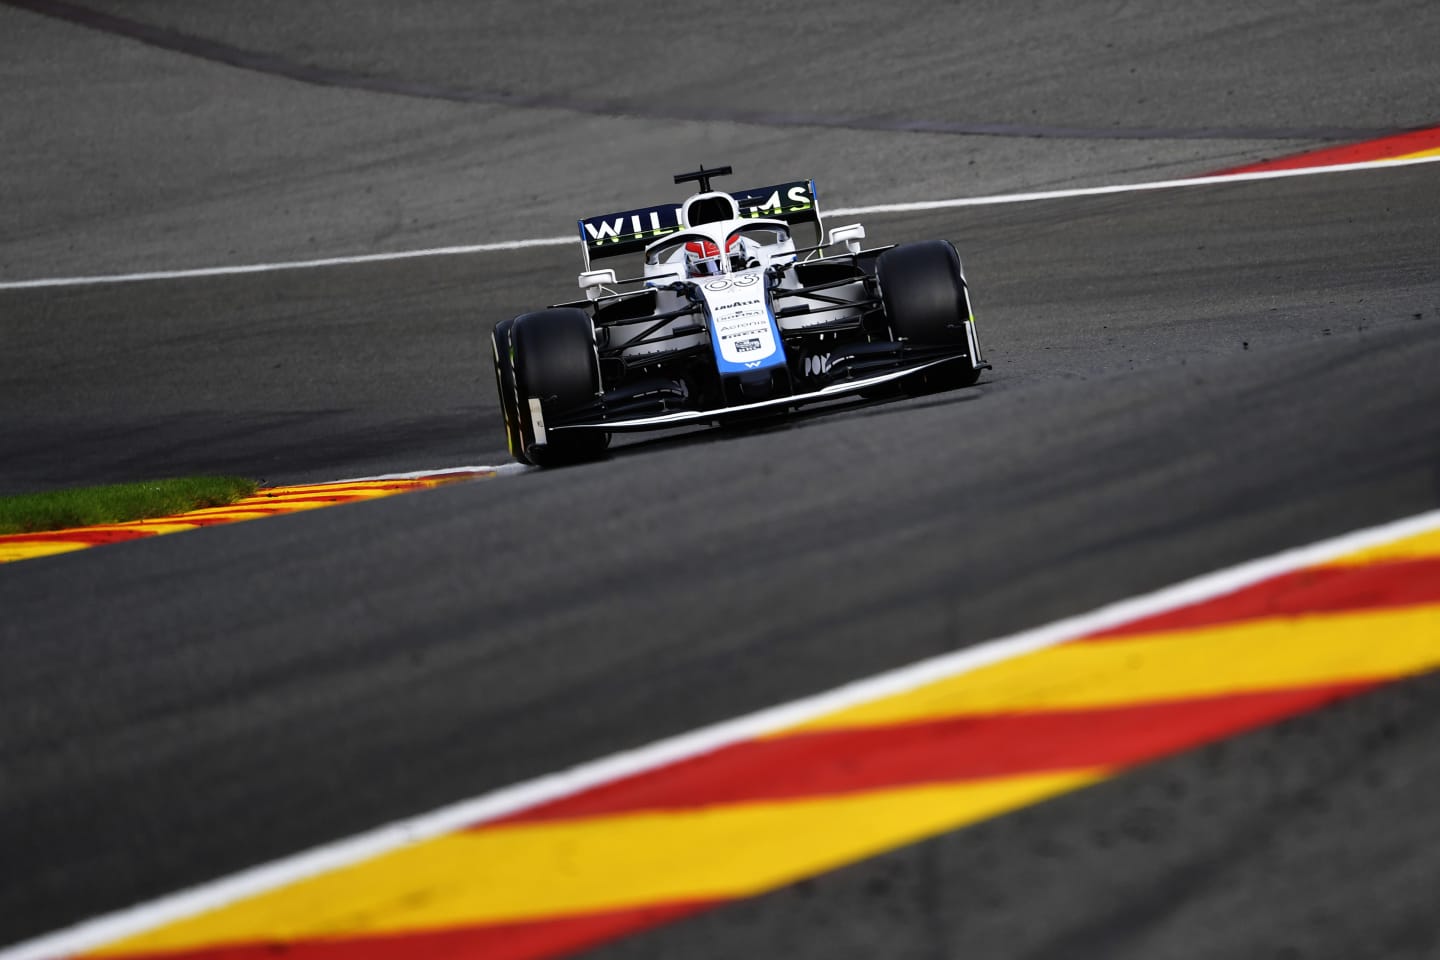 SPA, BELGIUM - AUGUST 28: George Russell of Great Britain driving the (63) Williams Racing FW43 Mercedes on track during practice for the F1 Grand Prix of Belgium at Circuit de Spa-Francorchamps on August 28, 2020 in Spa, Belgium. (Photo by John Thuys/Pool via Getty Images)